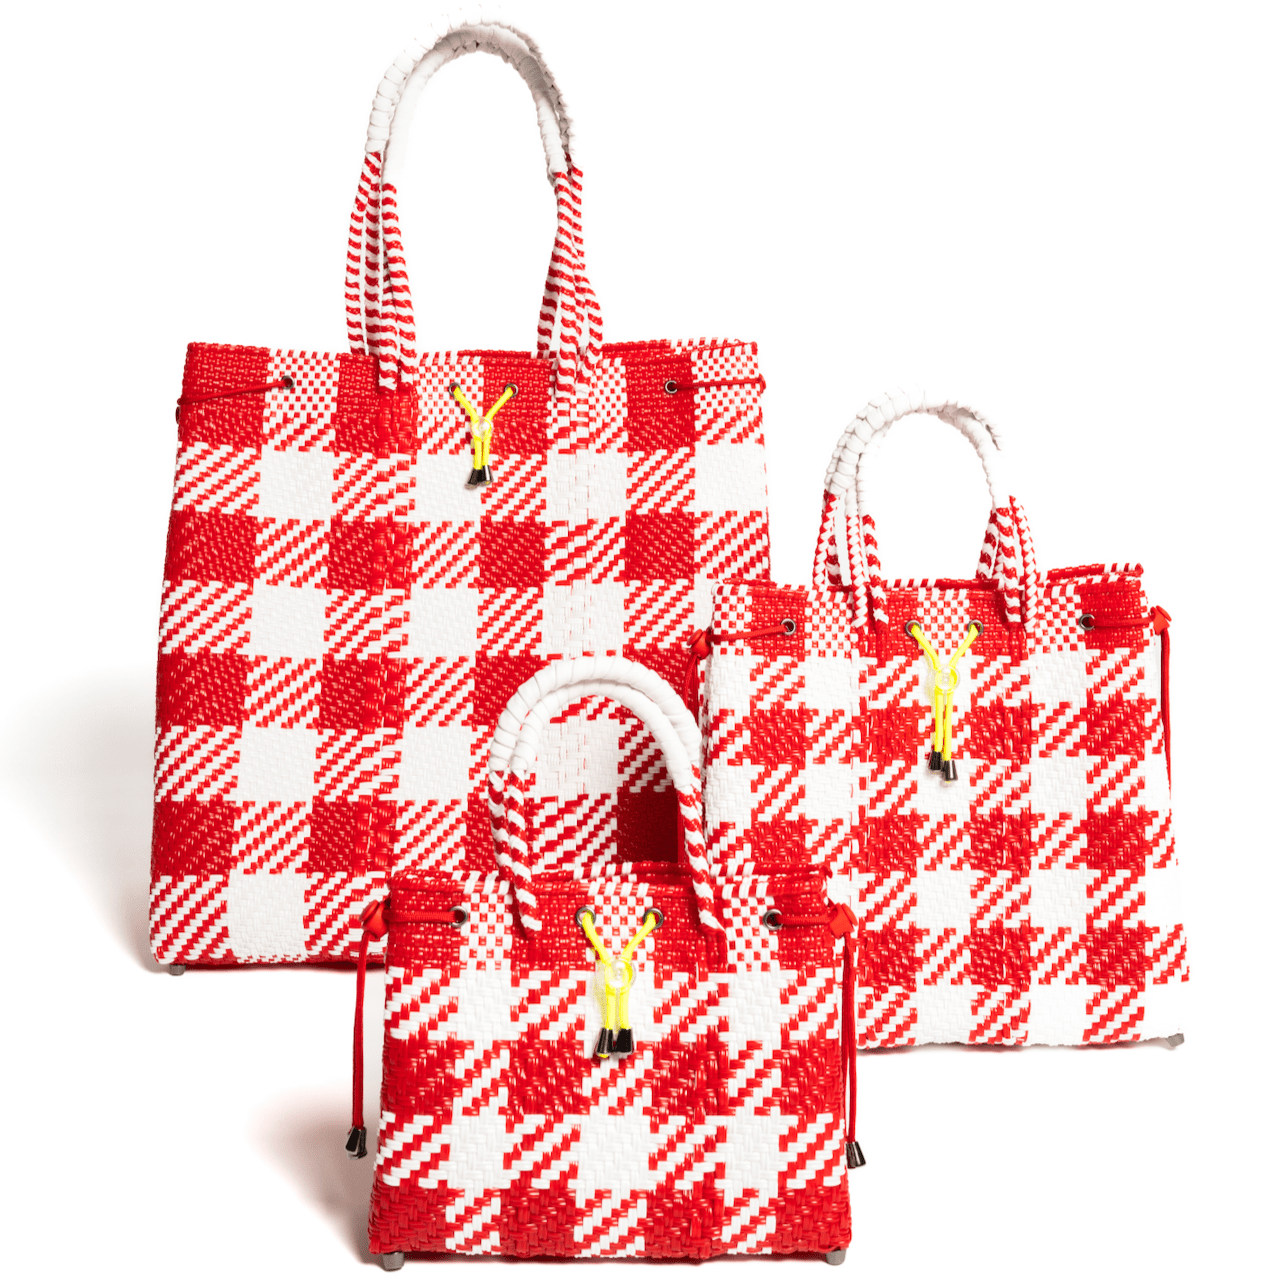 The All The Things Bags + Wallets Carryall / Picnic | Rojo The Carryall Bag in Picnic | Rojo